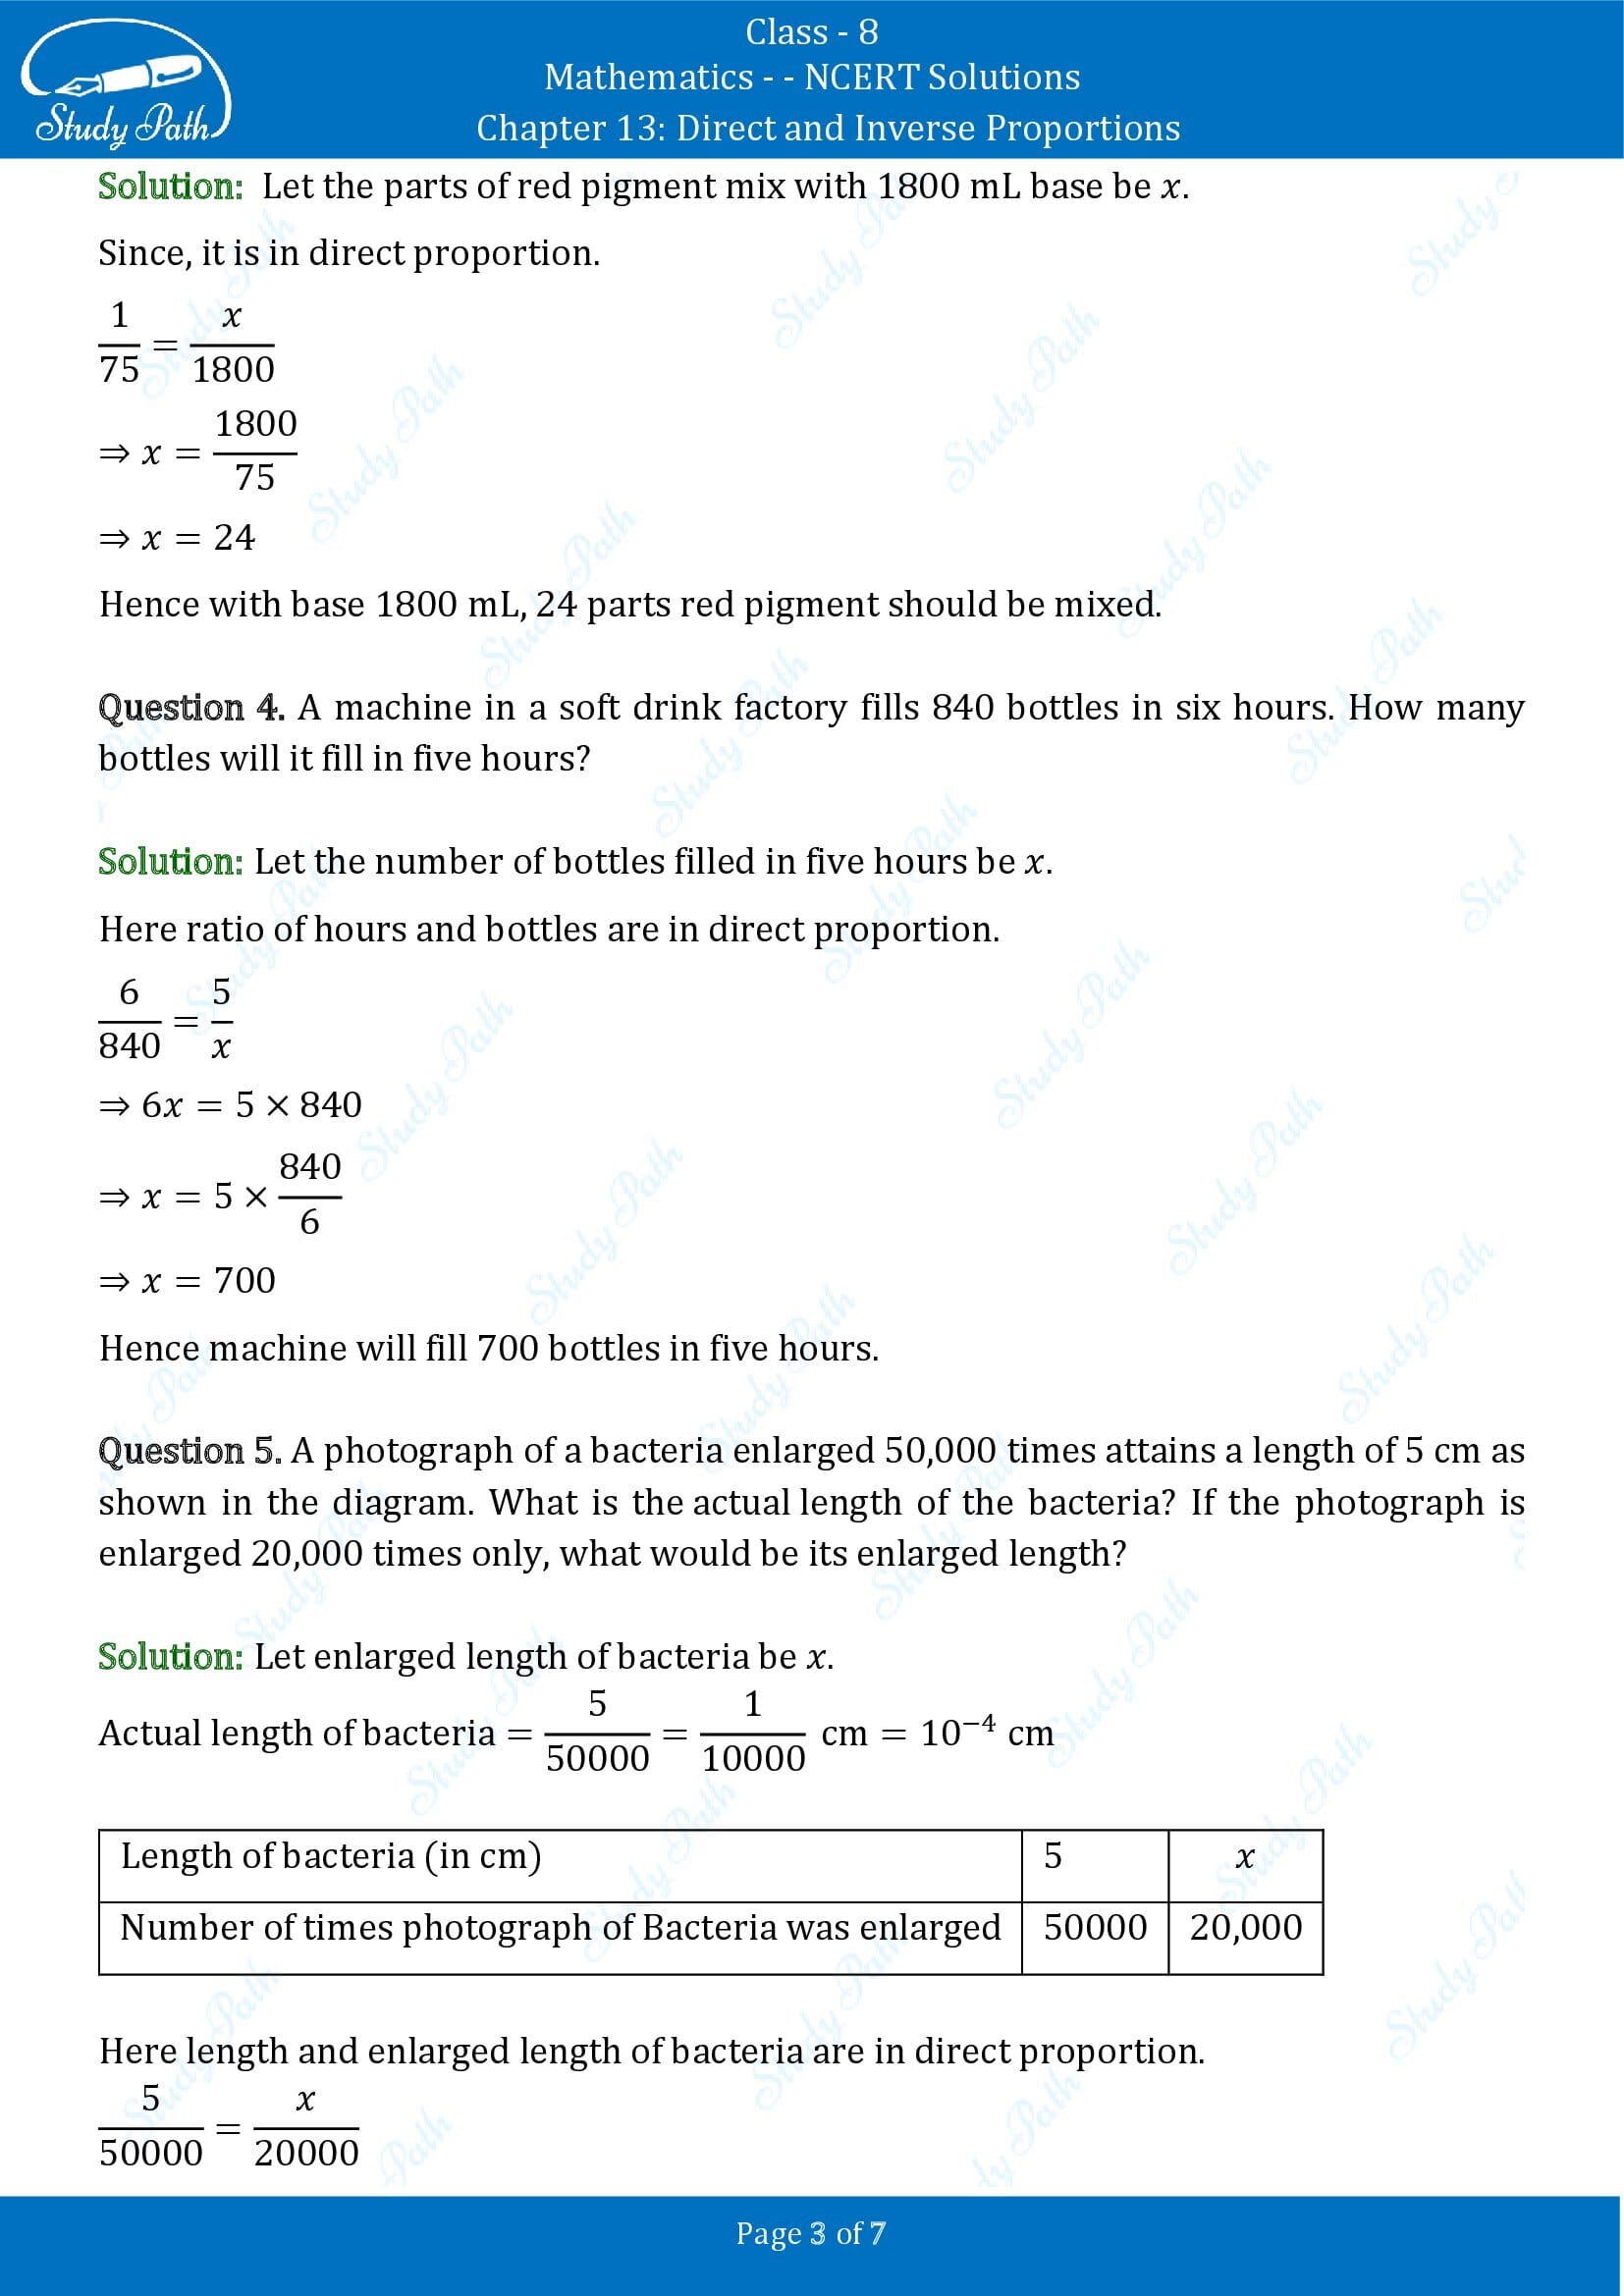 NCERT Solutions Class 8 Maths Chapter 13 Direct and Inverse